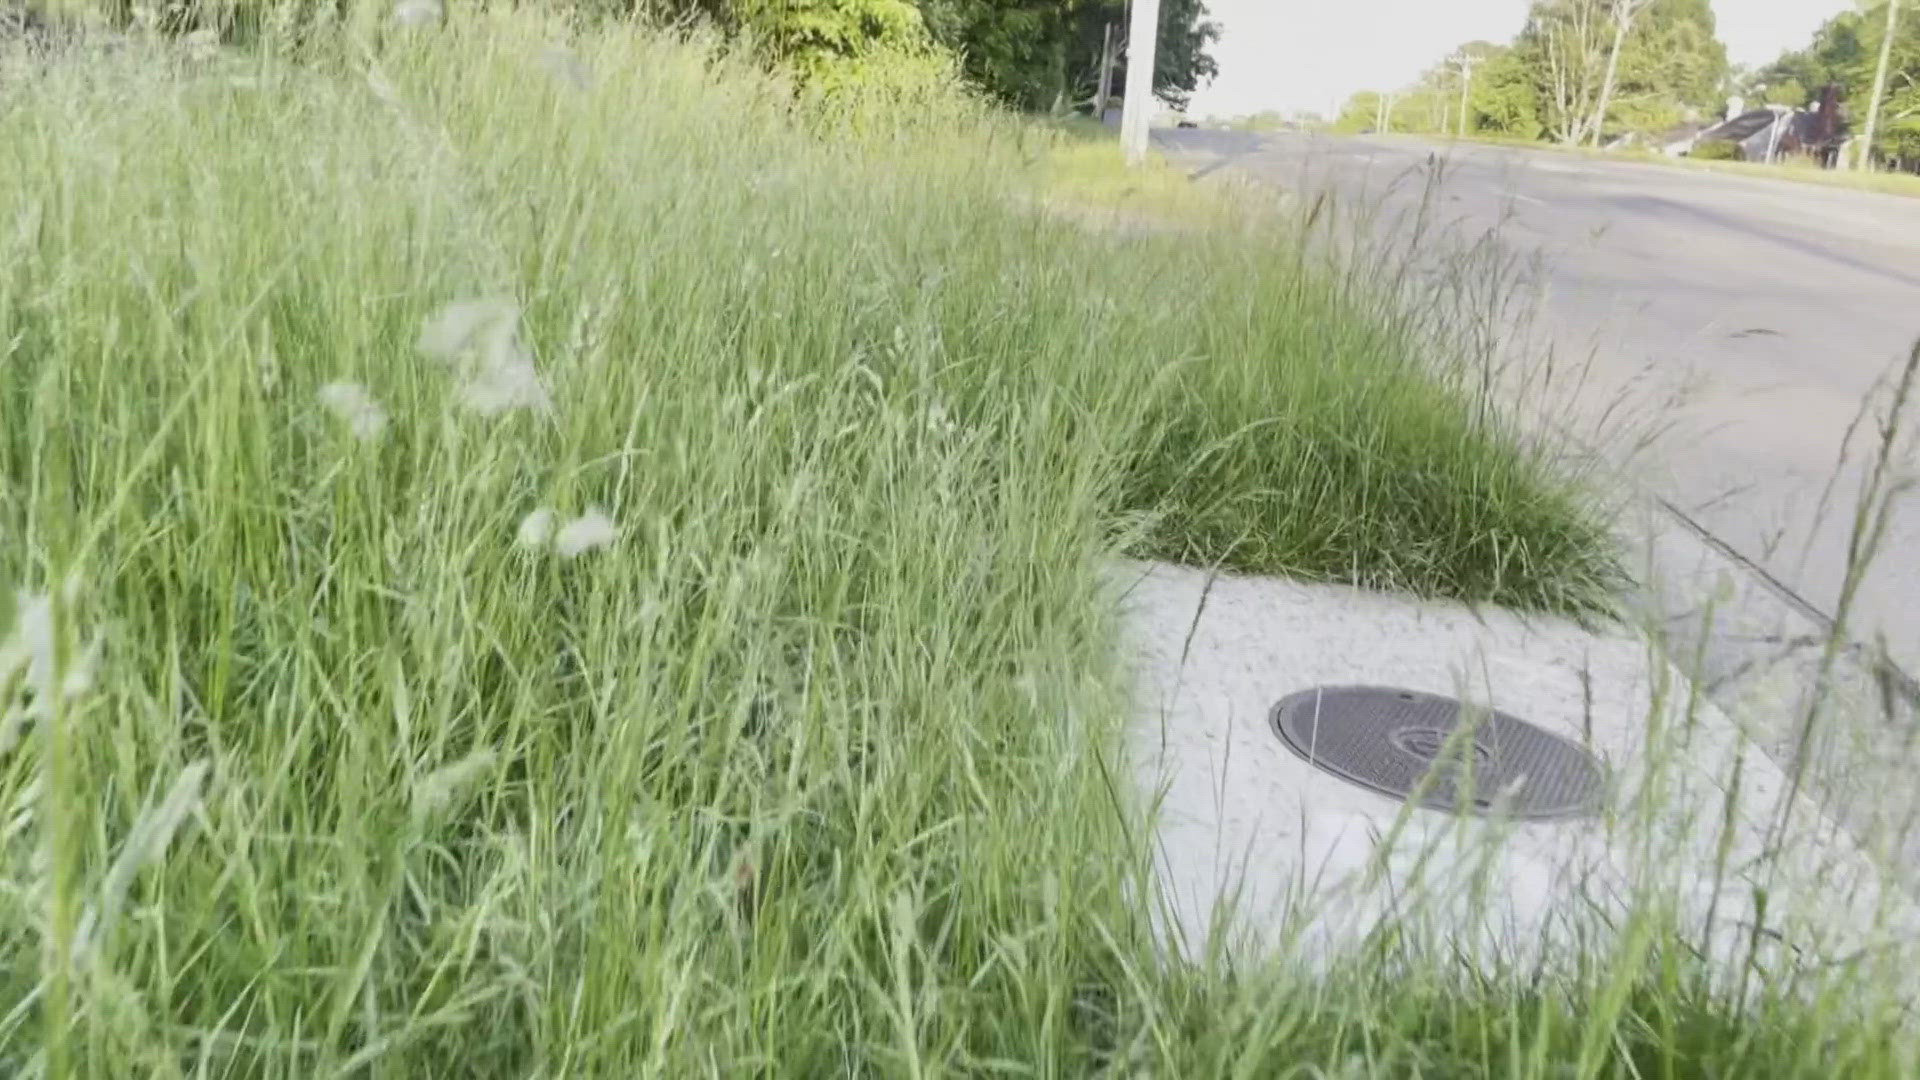 Tall grass is the number one code complaint the City gets. And fines start around $300.